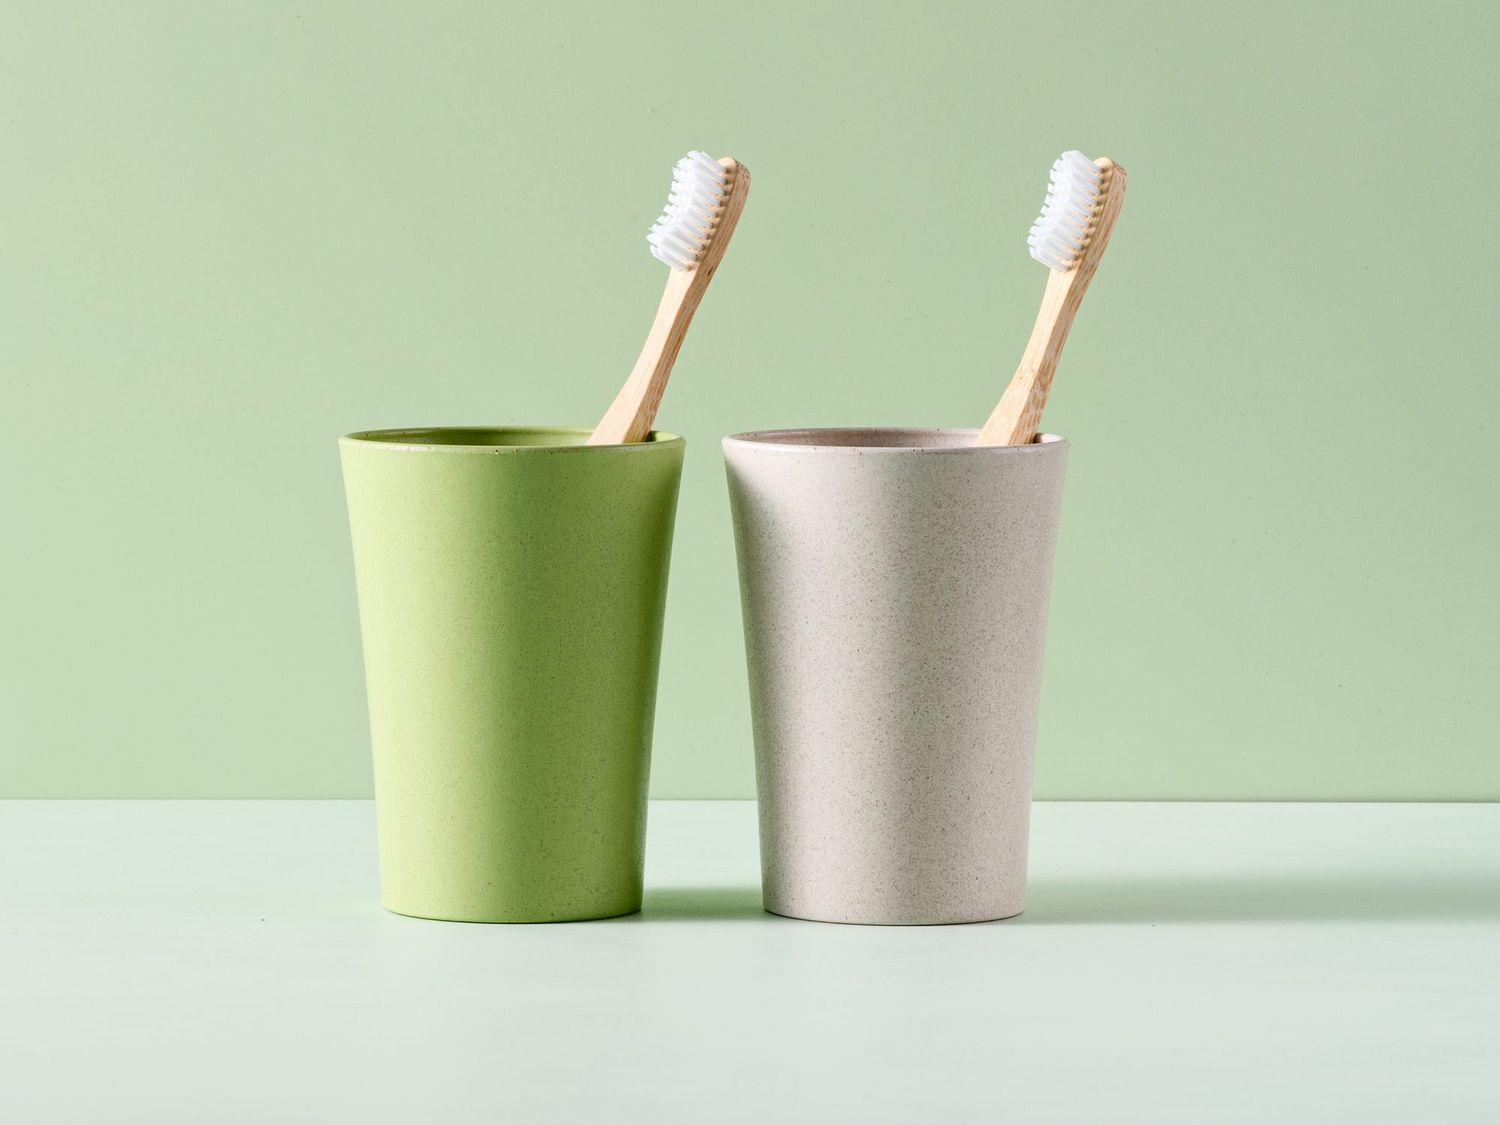 Bamboo Wood Toothbrush with Biodegradable Cup